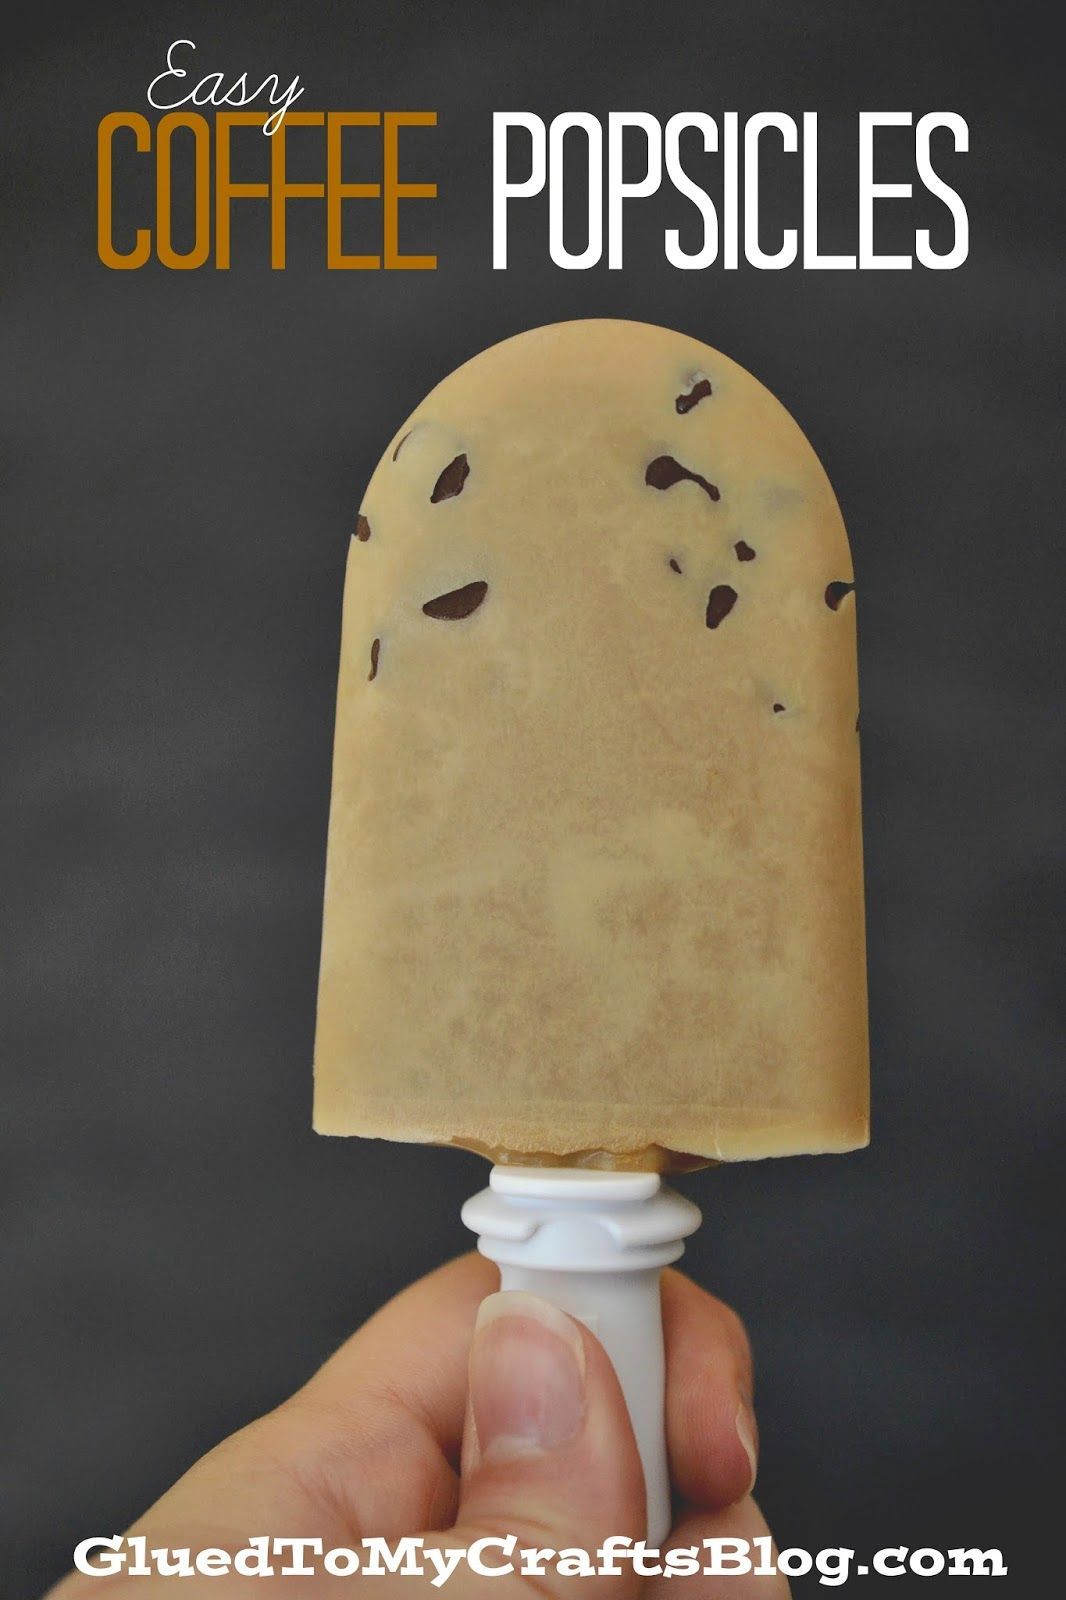 Easy Coffee Popsicles {Recipe} via Glued to My Crafts